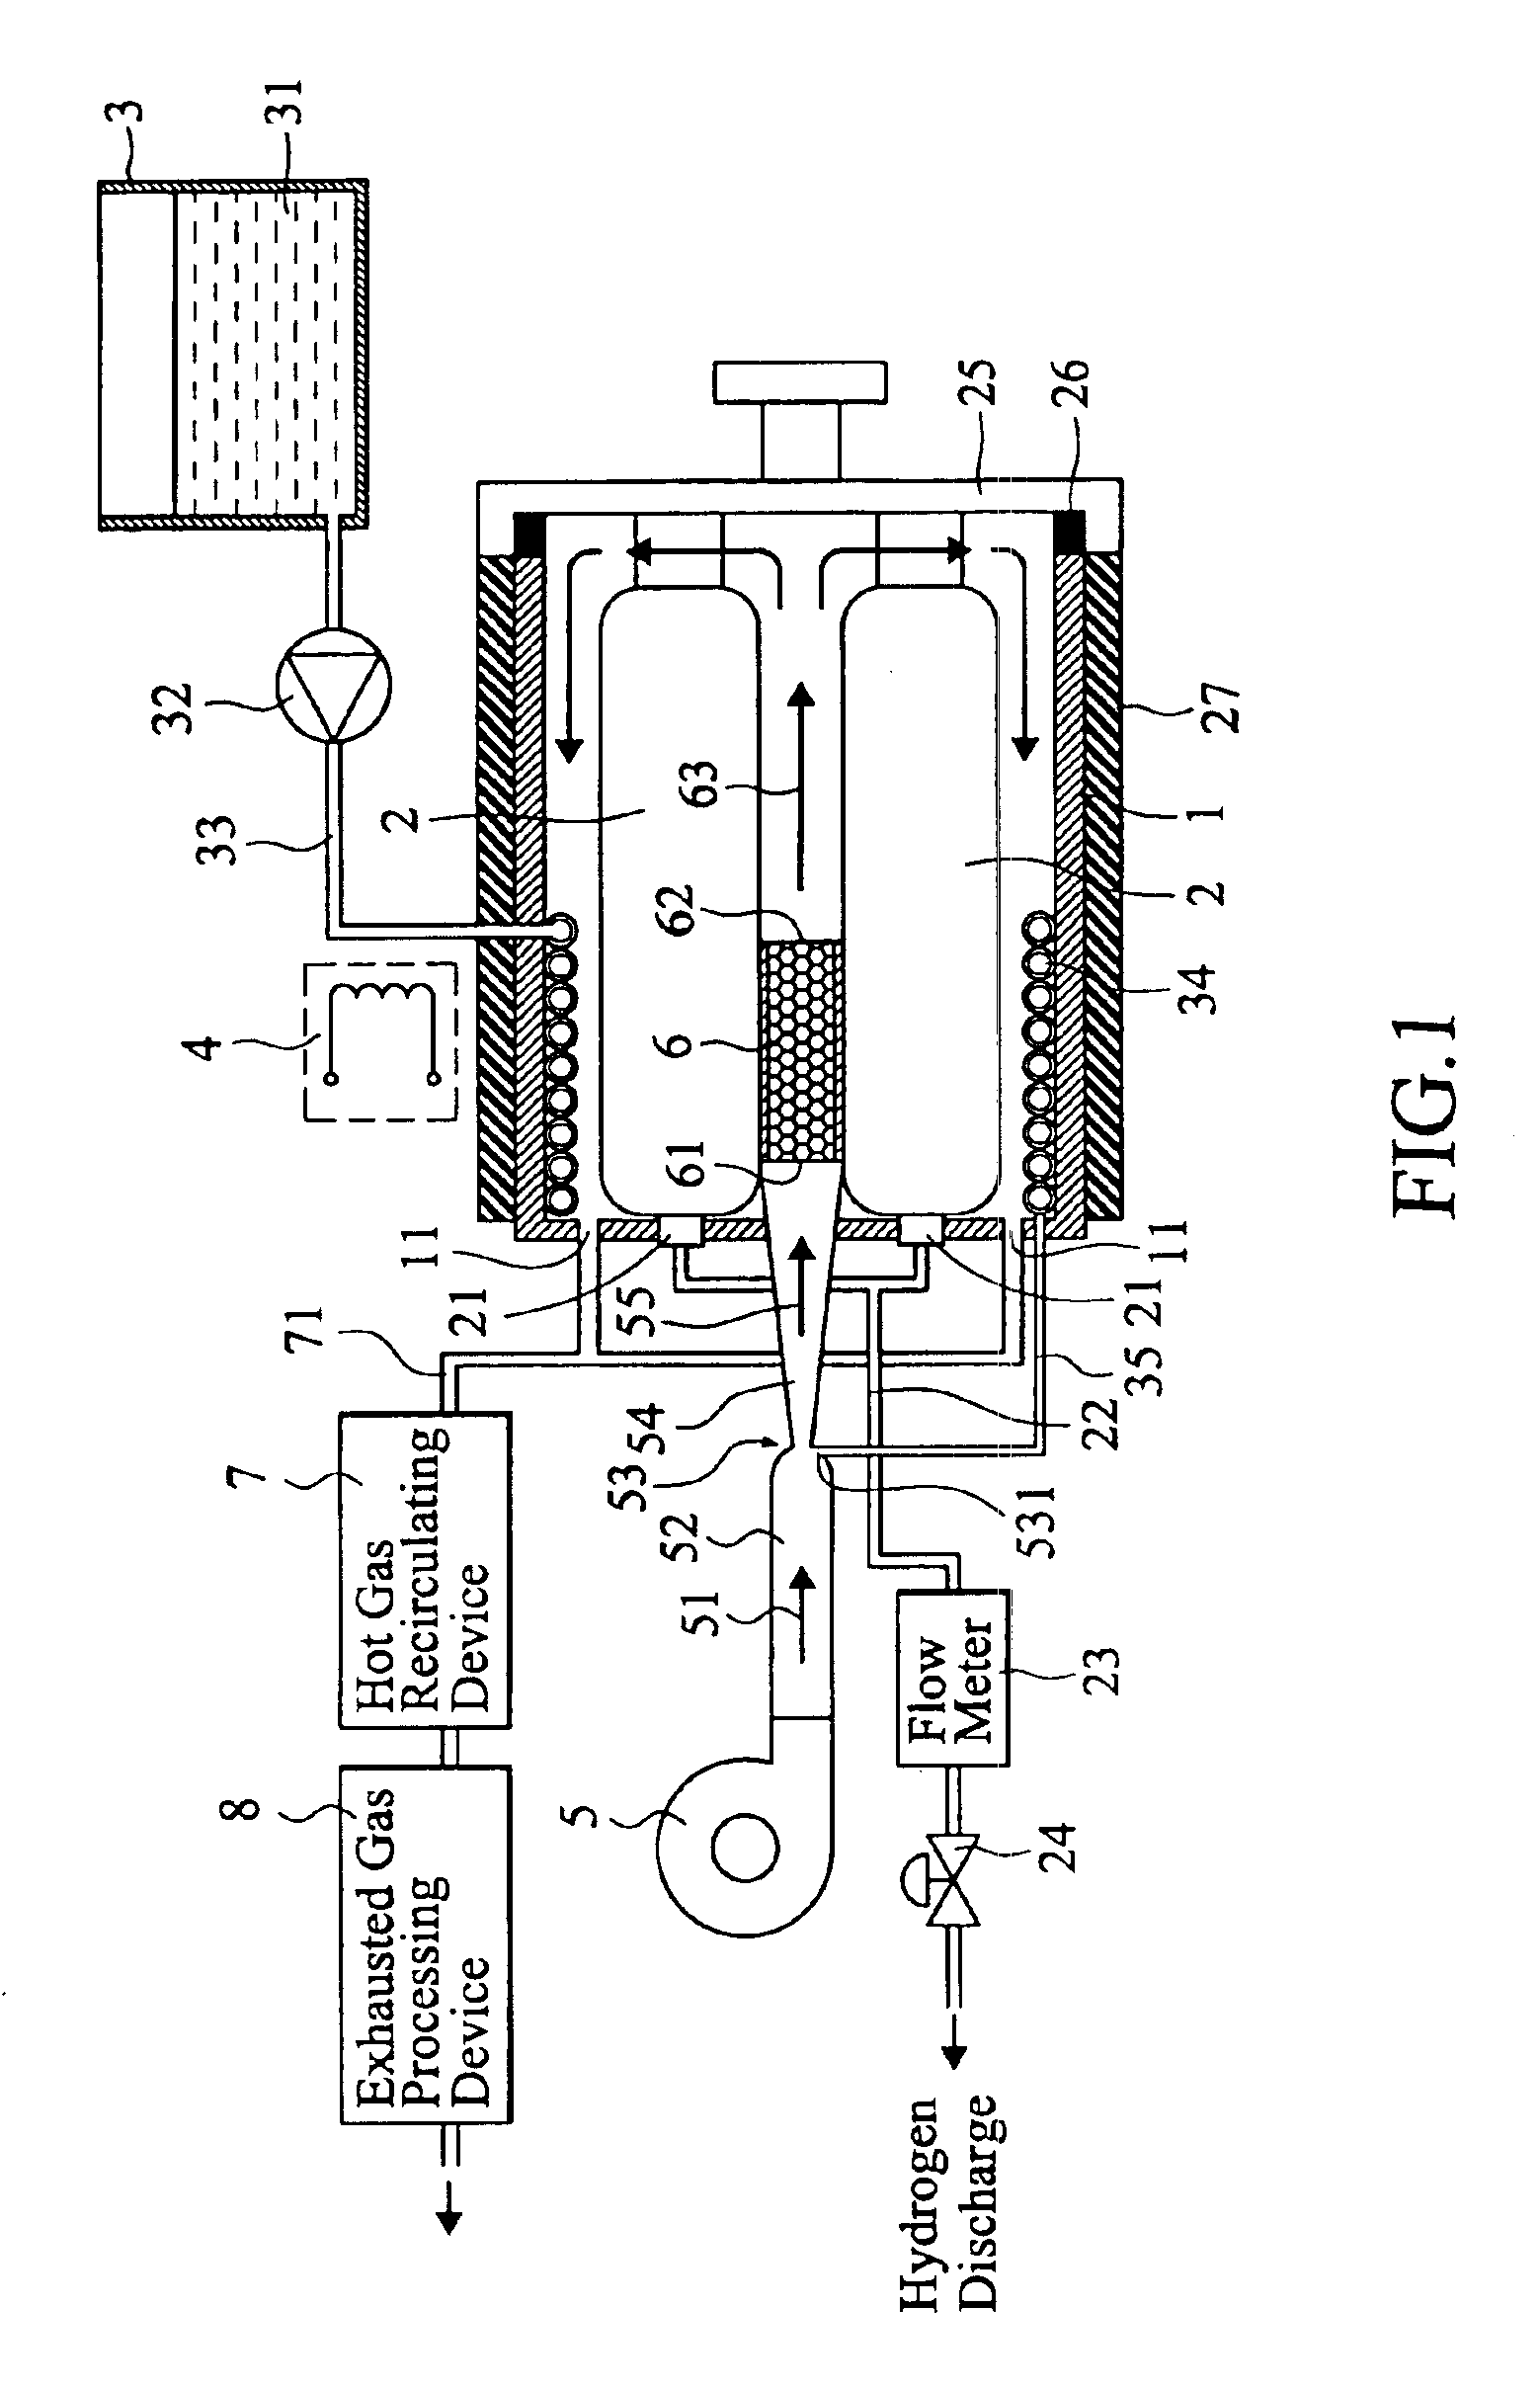 Device and method for heating hydrogen storage canister